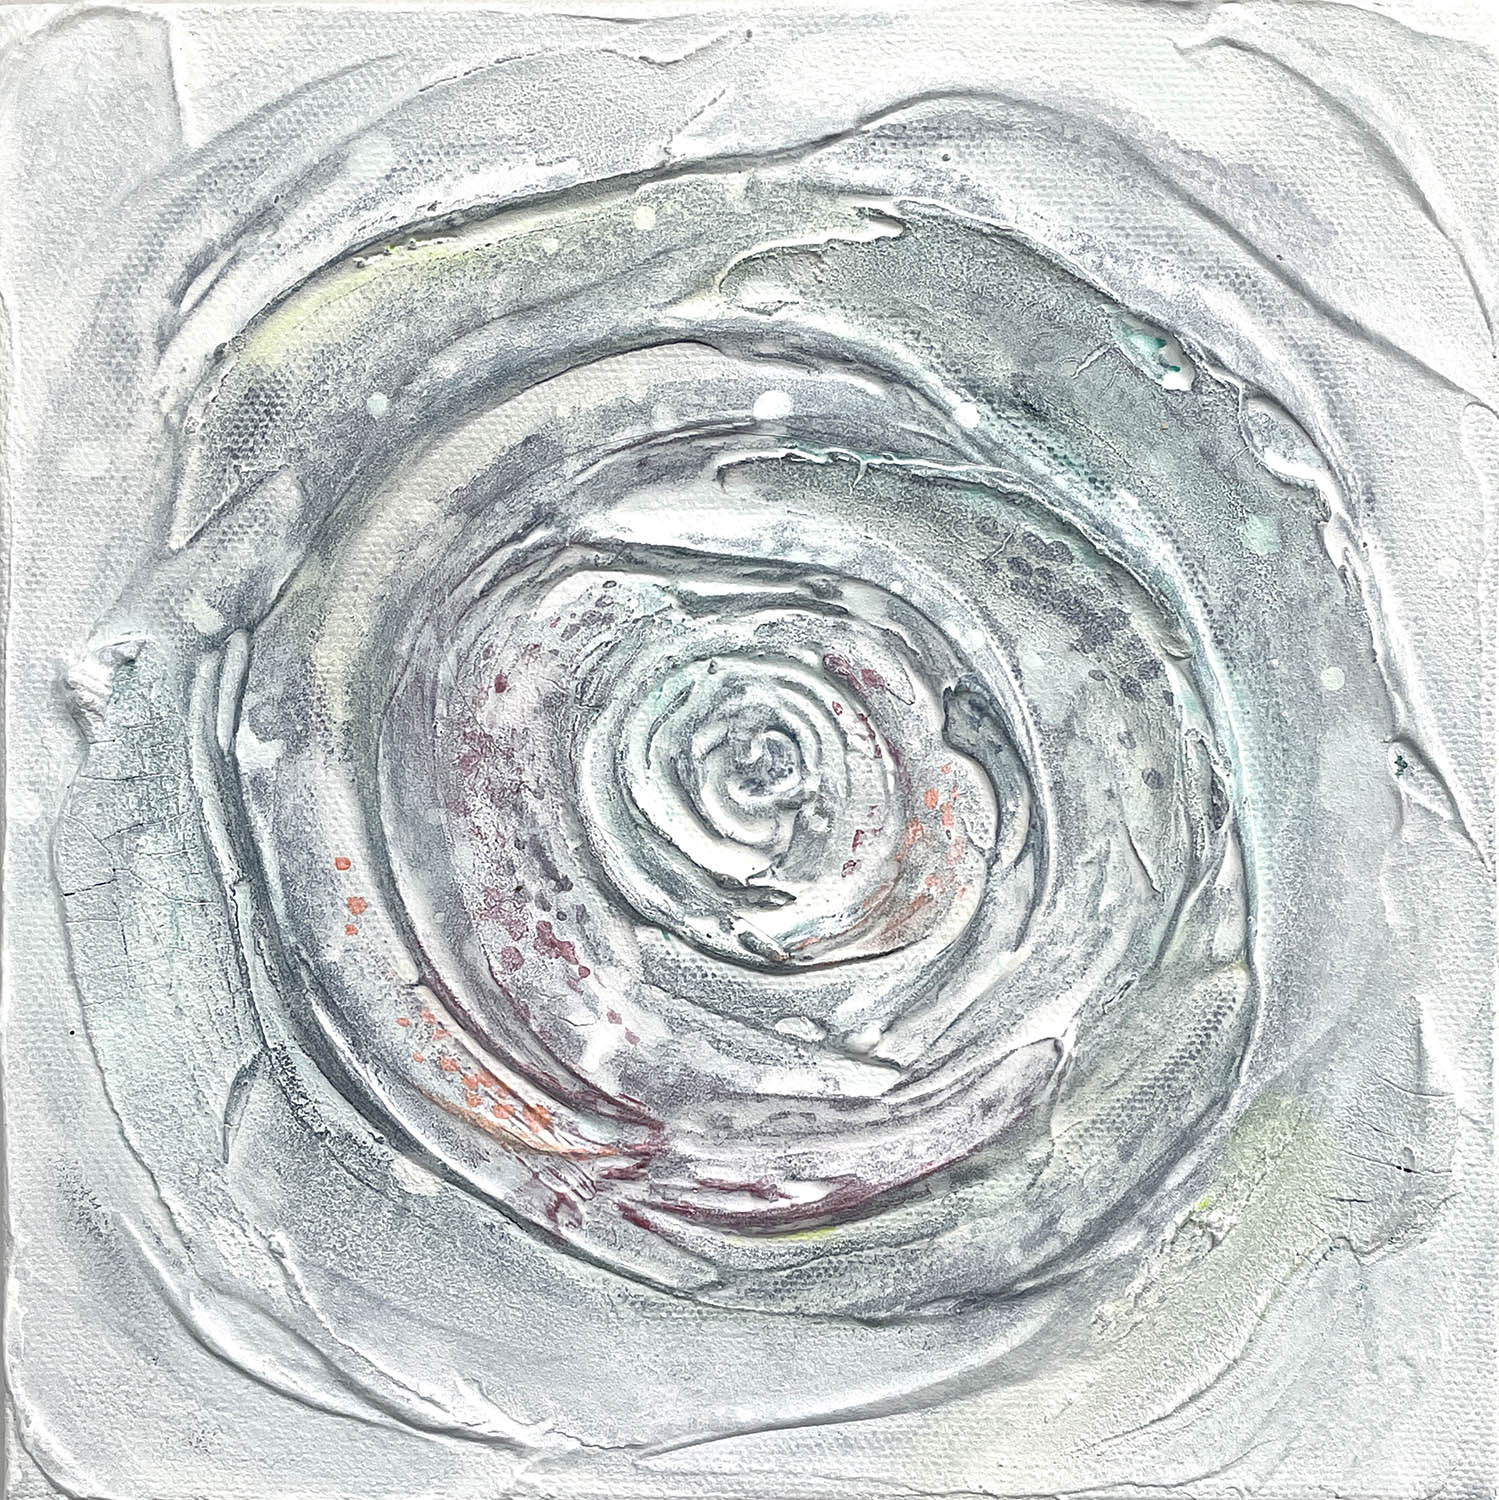 Healing5 abstract rose painting